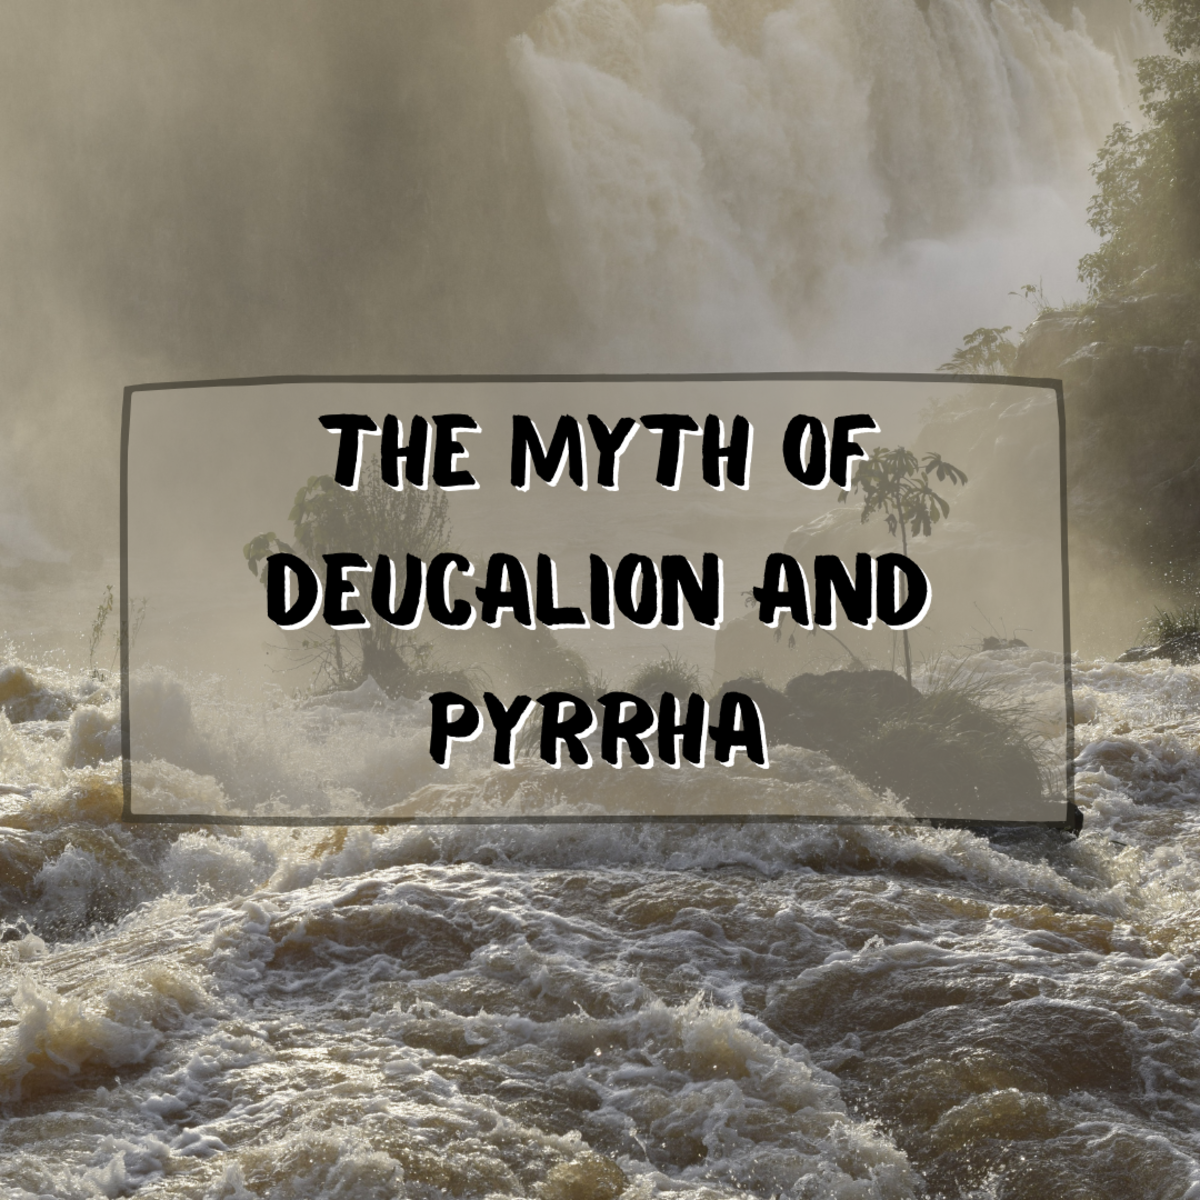 This article discusses the Greek myth of Deucalion and Pyrrha in detail, which is a Great Flood myth.